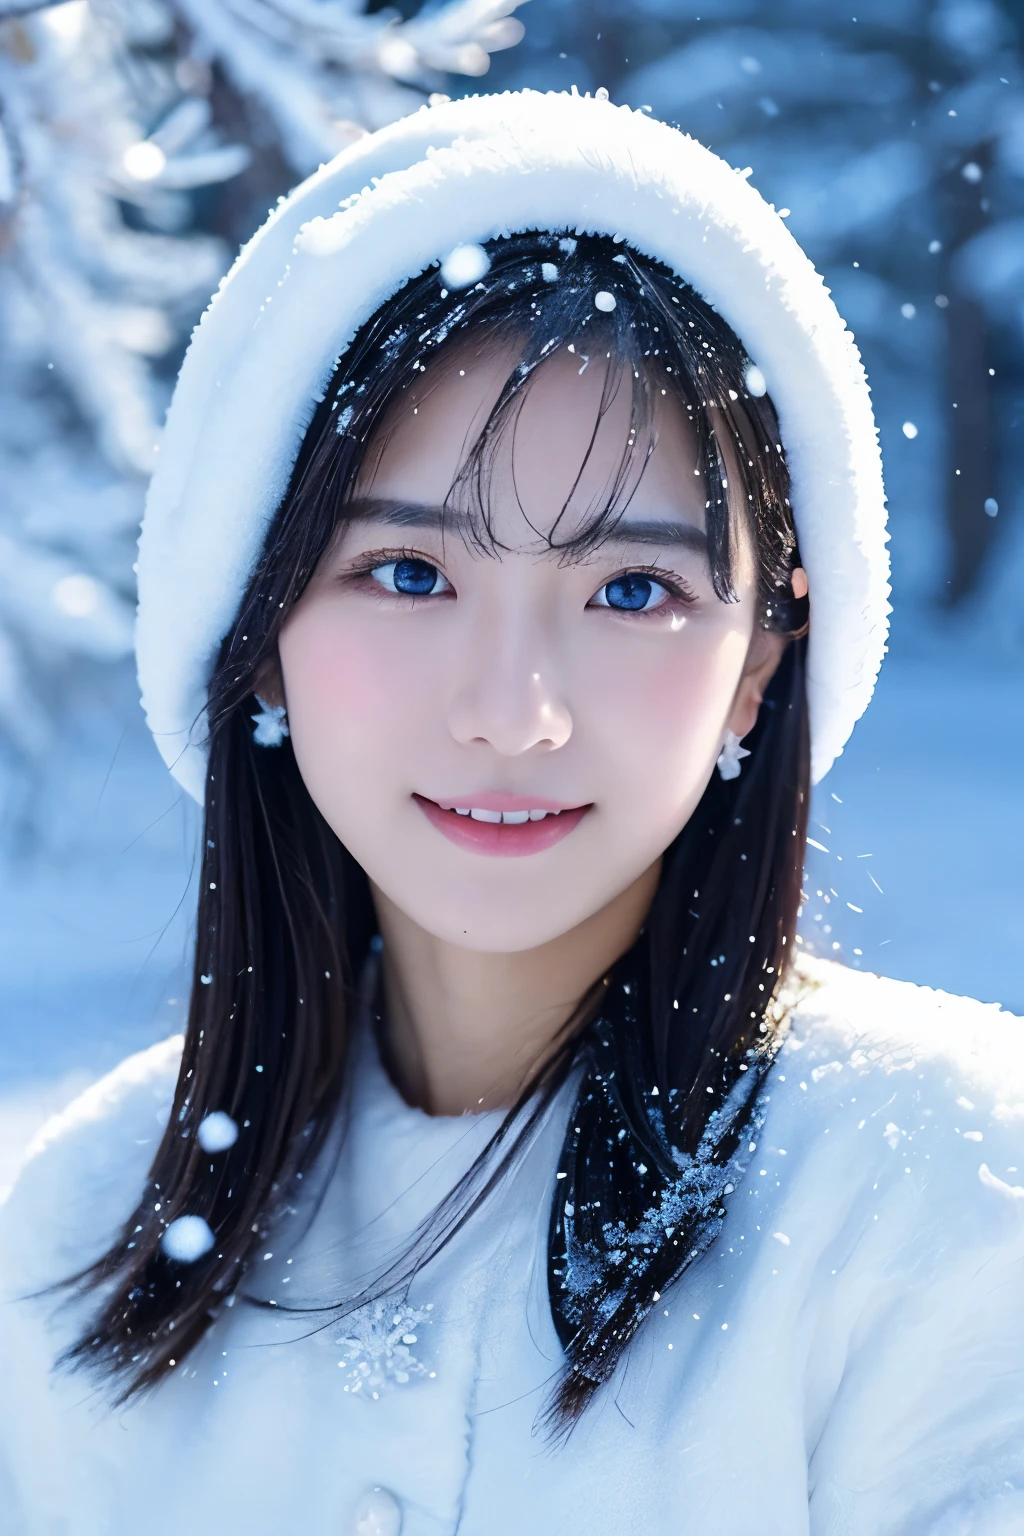 1girl in, (white winter costume:1.2), Japanese beautiful actress,
(Raw photo, Best Quality), (Realistic, Photorealsitic:1.4), (masutepiece), 
Snow Princess, Beautiful detailed eyes, Beautiful detailed lips, extremely detailed eye and face, long eyelashes,
Snowflake Earrings,
BREAK
(Lapland snow field in winter), 
Sparkling snowflakes, ethereal beauty, Swirling snowflakes, Snowy trees々, A world full of dazzling light,
Luminescent debris, Powder snow, Snowflakes shining in the sunshine, snow-capped mountain, Icy breath, 
Blue and silver color scheme, Ramatic Lighting, diamond dust shine,
BREAK Perfect Anatomy, Slender body, Small, Short hair, Archaic Smile,
Crystal-like skin, -Clear eyes, 
Ultra-realistic, Photorealsiticです, photograph, photogenic